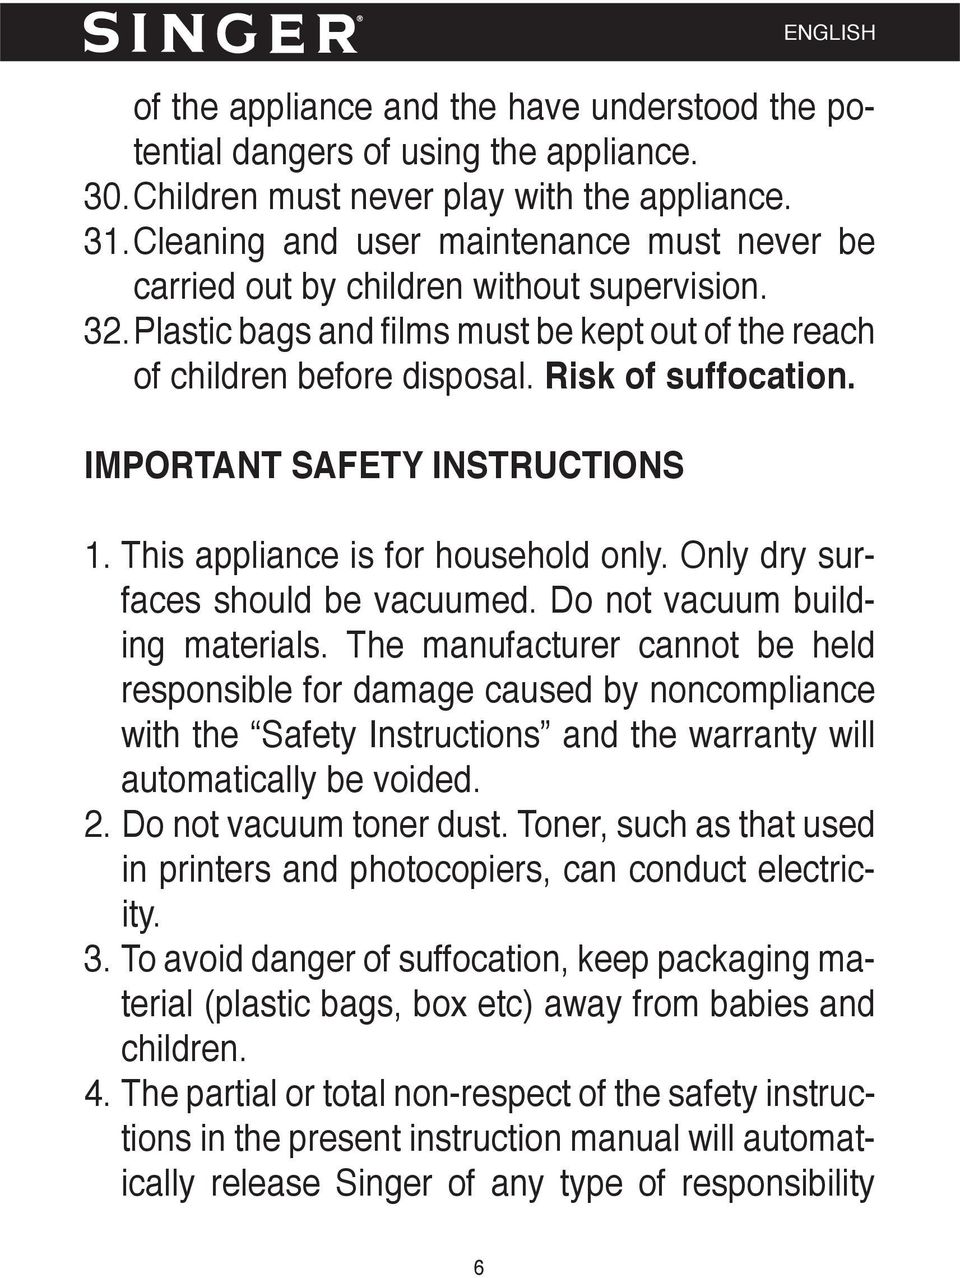 IMPORTANT SAFETY INSTRUCTIONS 1. This appliance is for household only. Only dry surfaces should be vacuumed. Do not vacuum building materials.